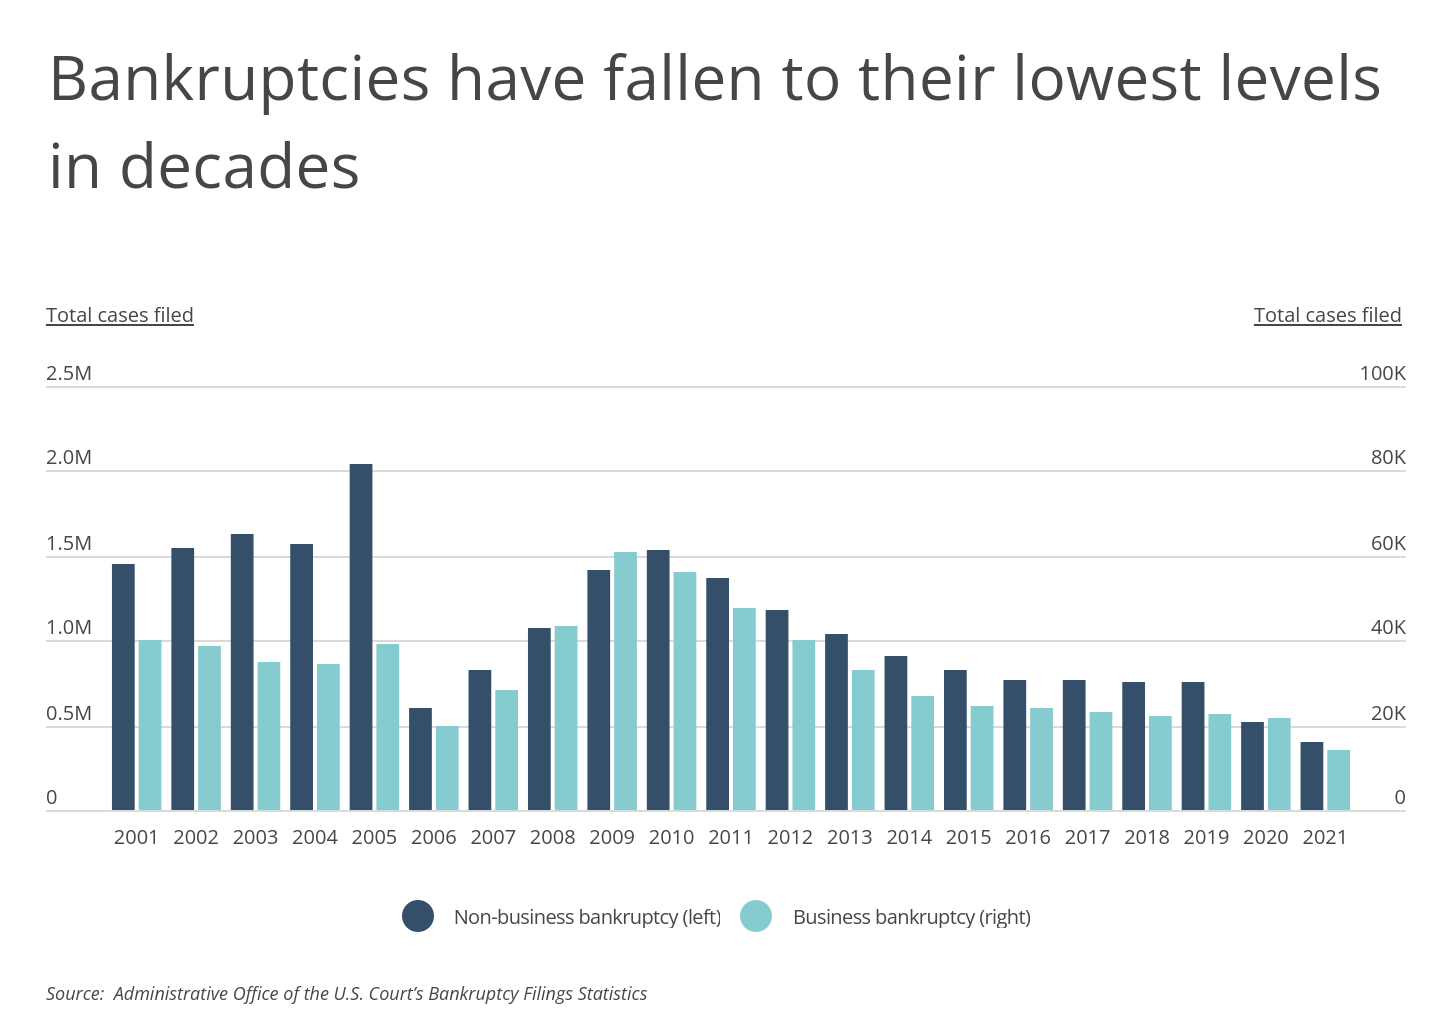 Chart1_Bankruptcies have fallen to their lowest levels in decades